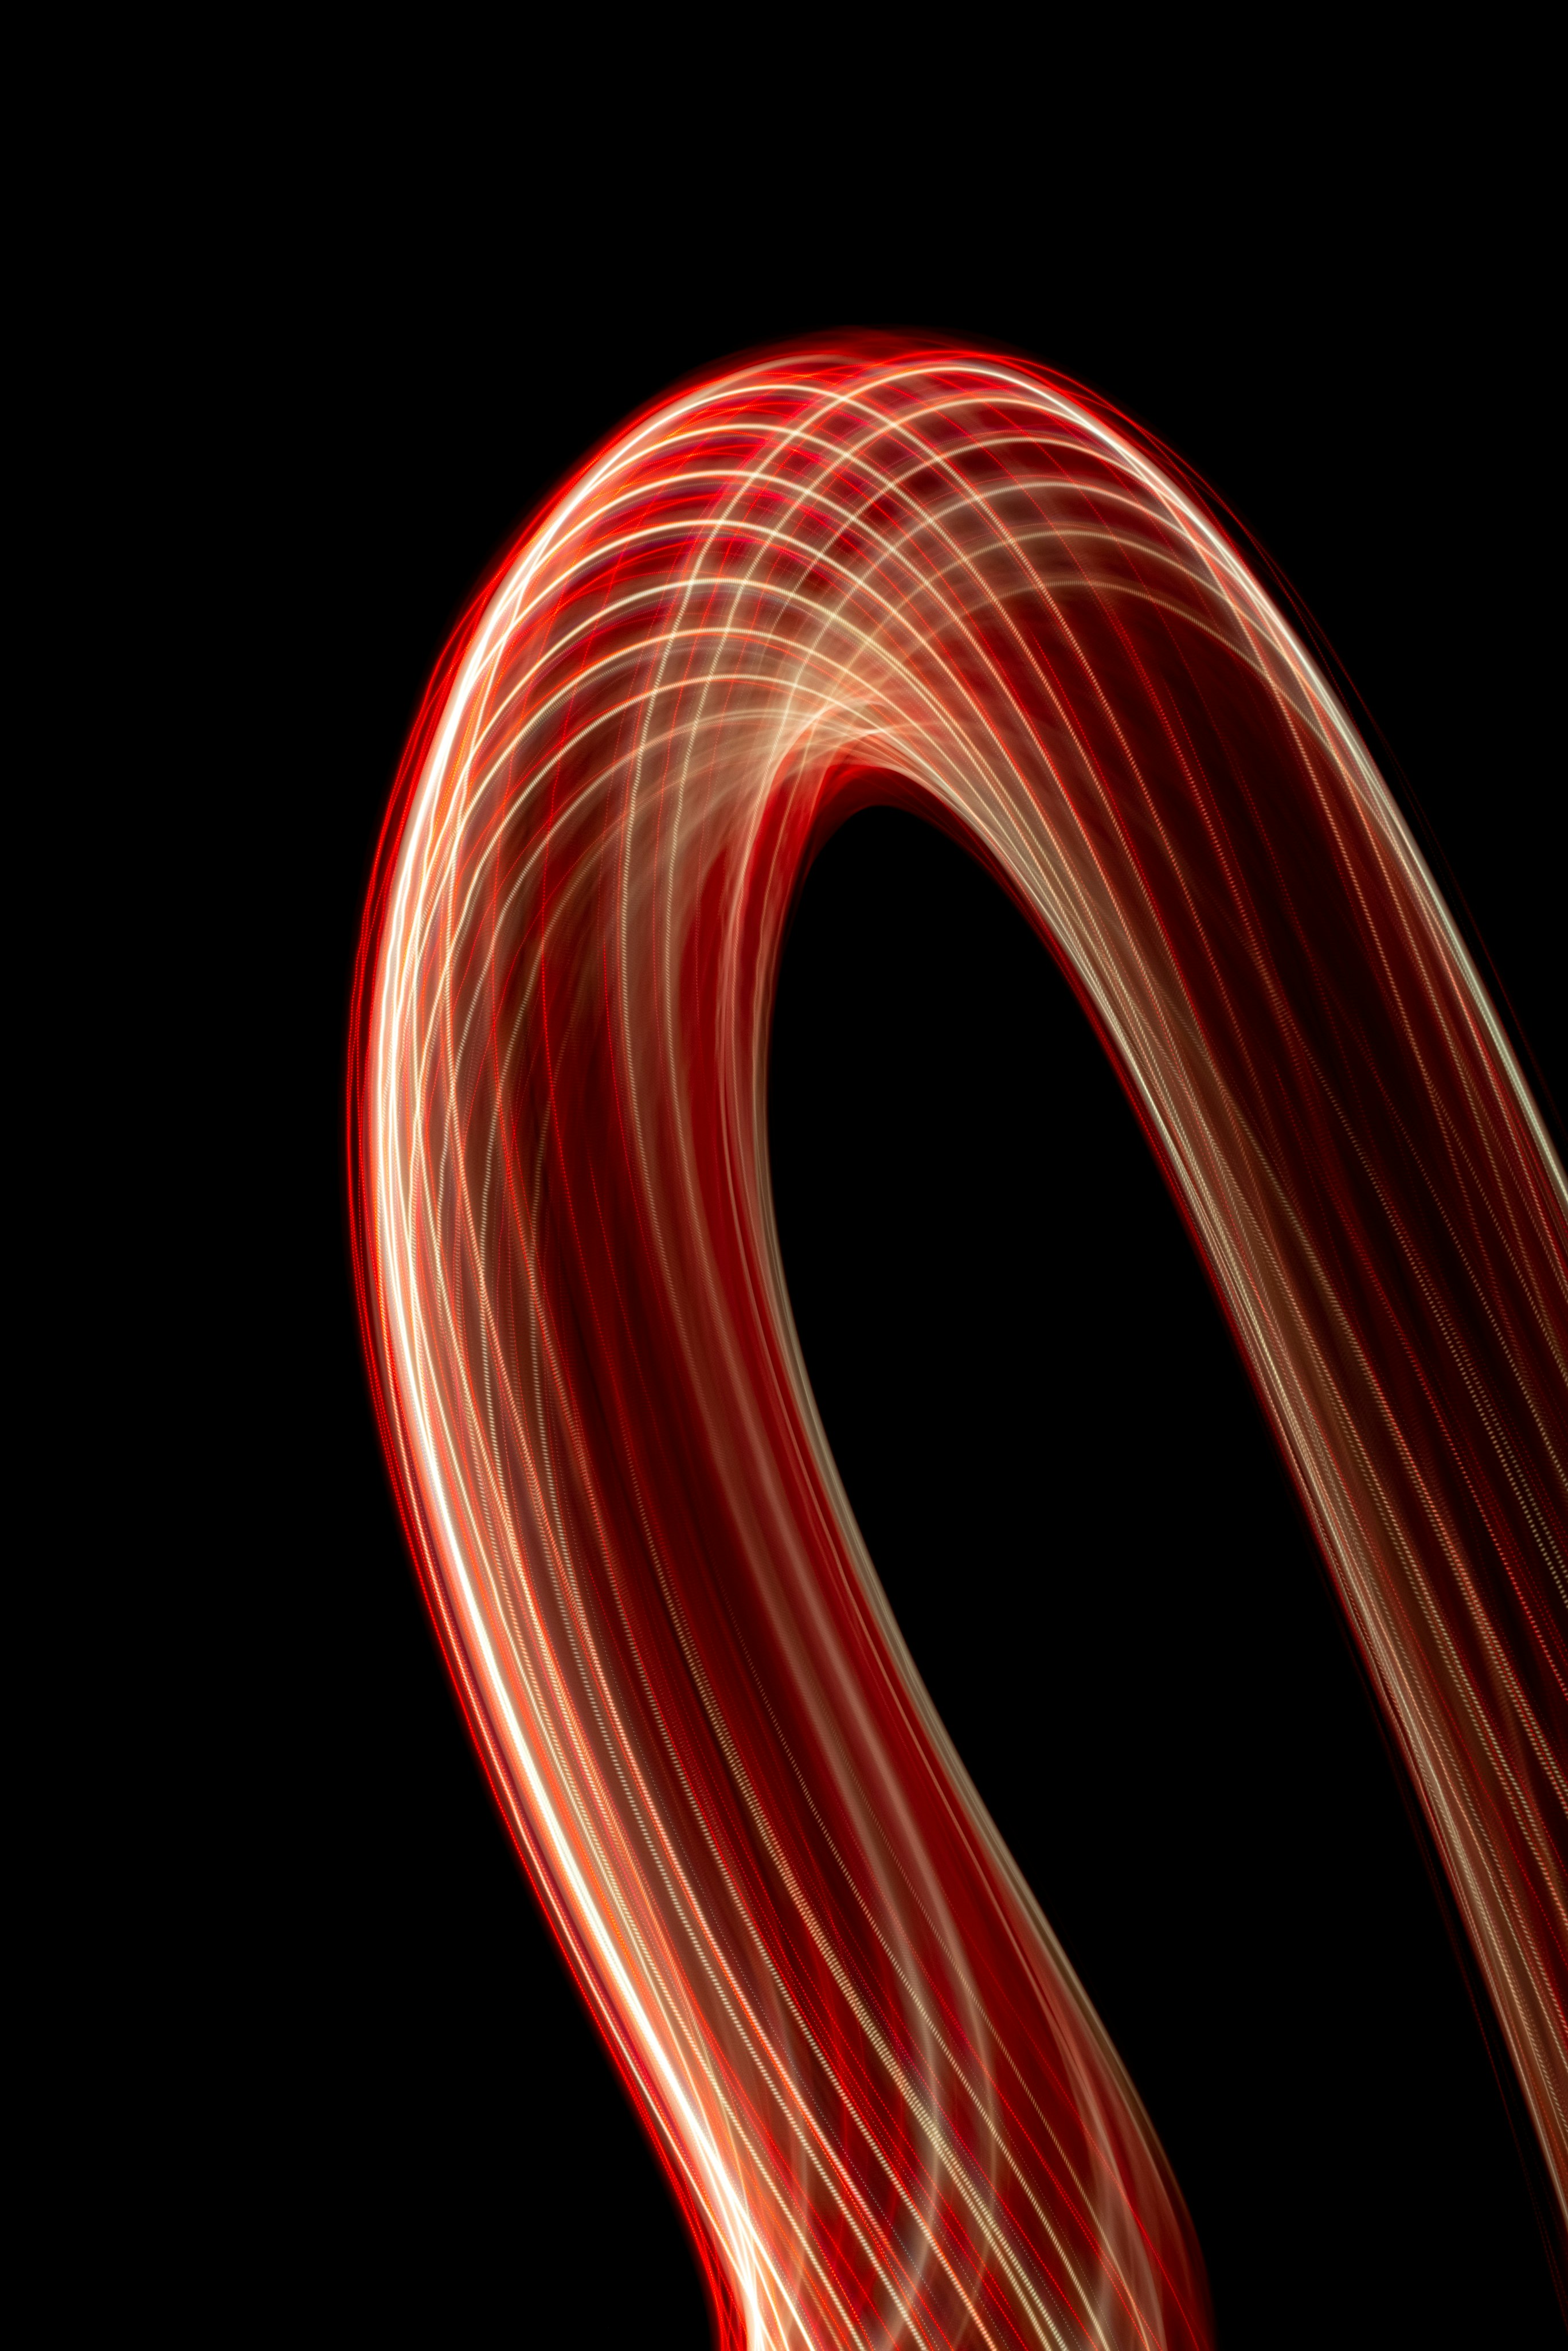 red and white spiral light